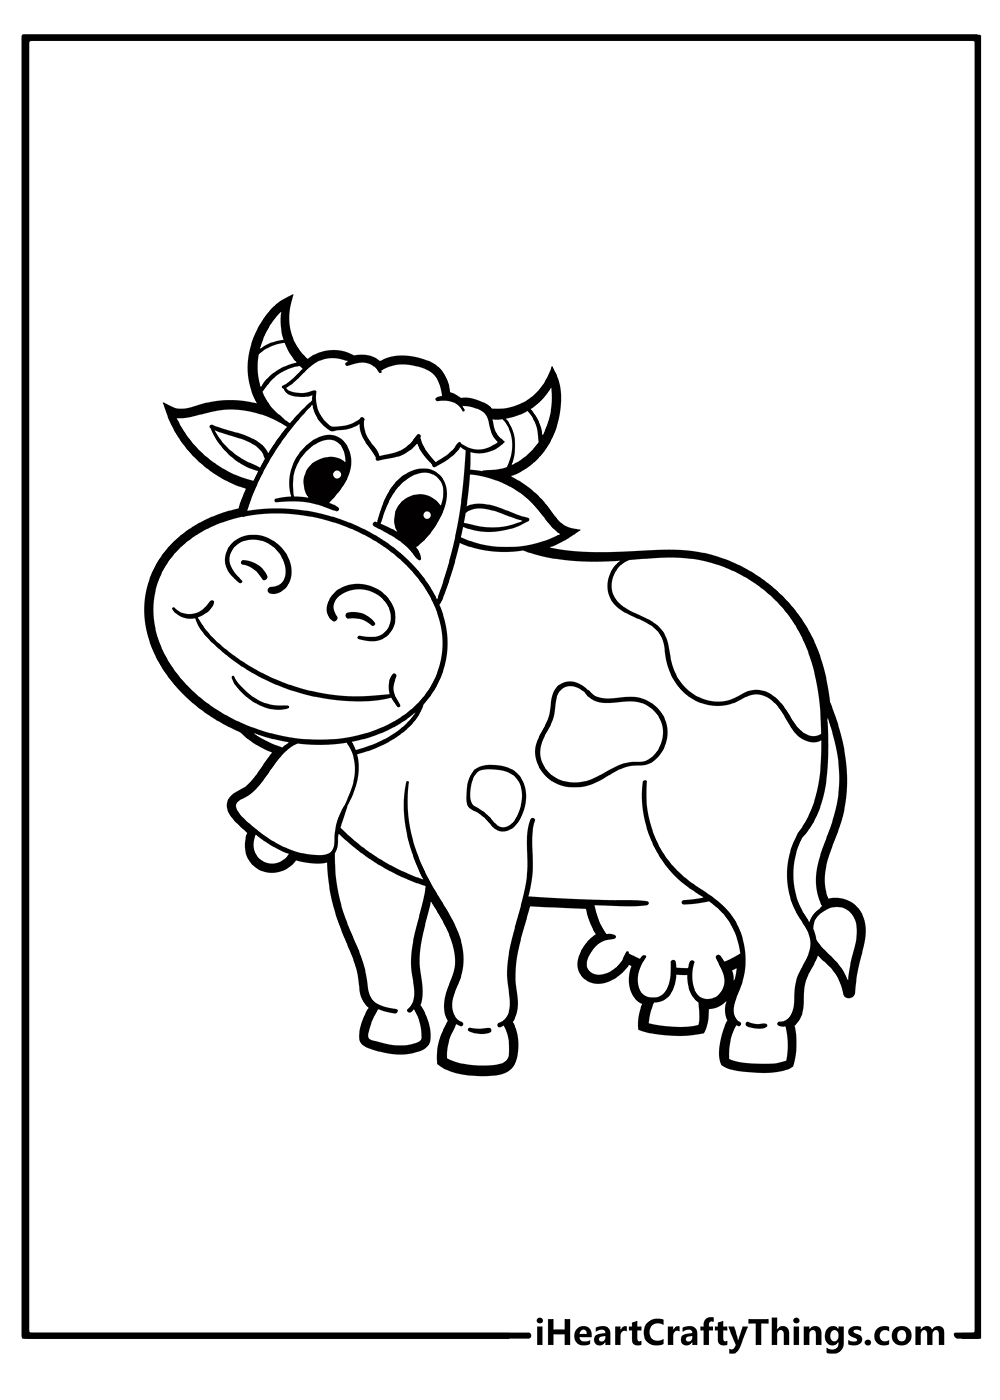 Cow Coloring Pages free print out